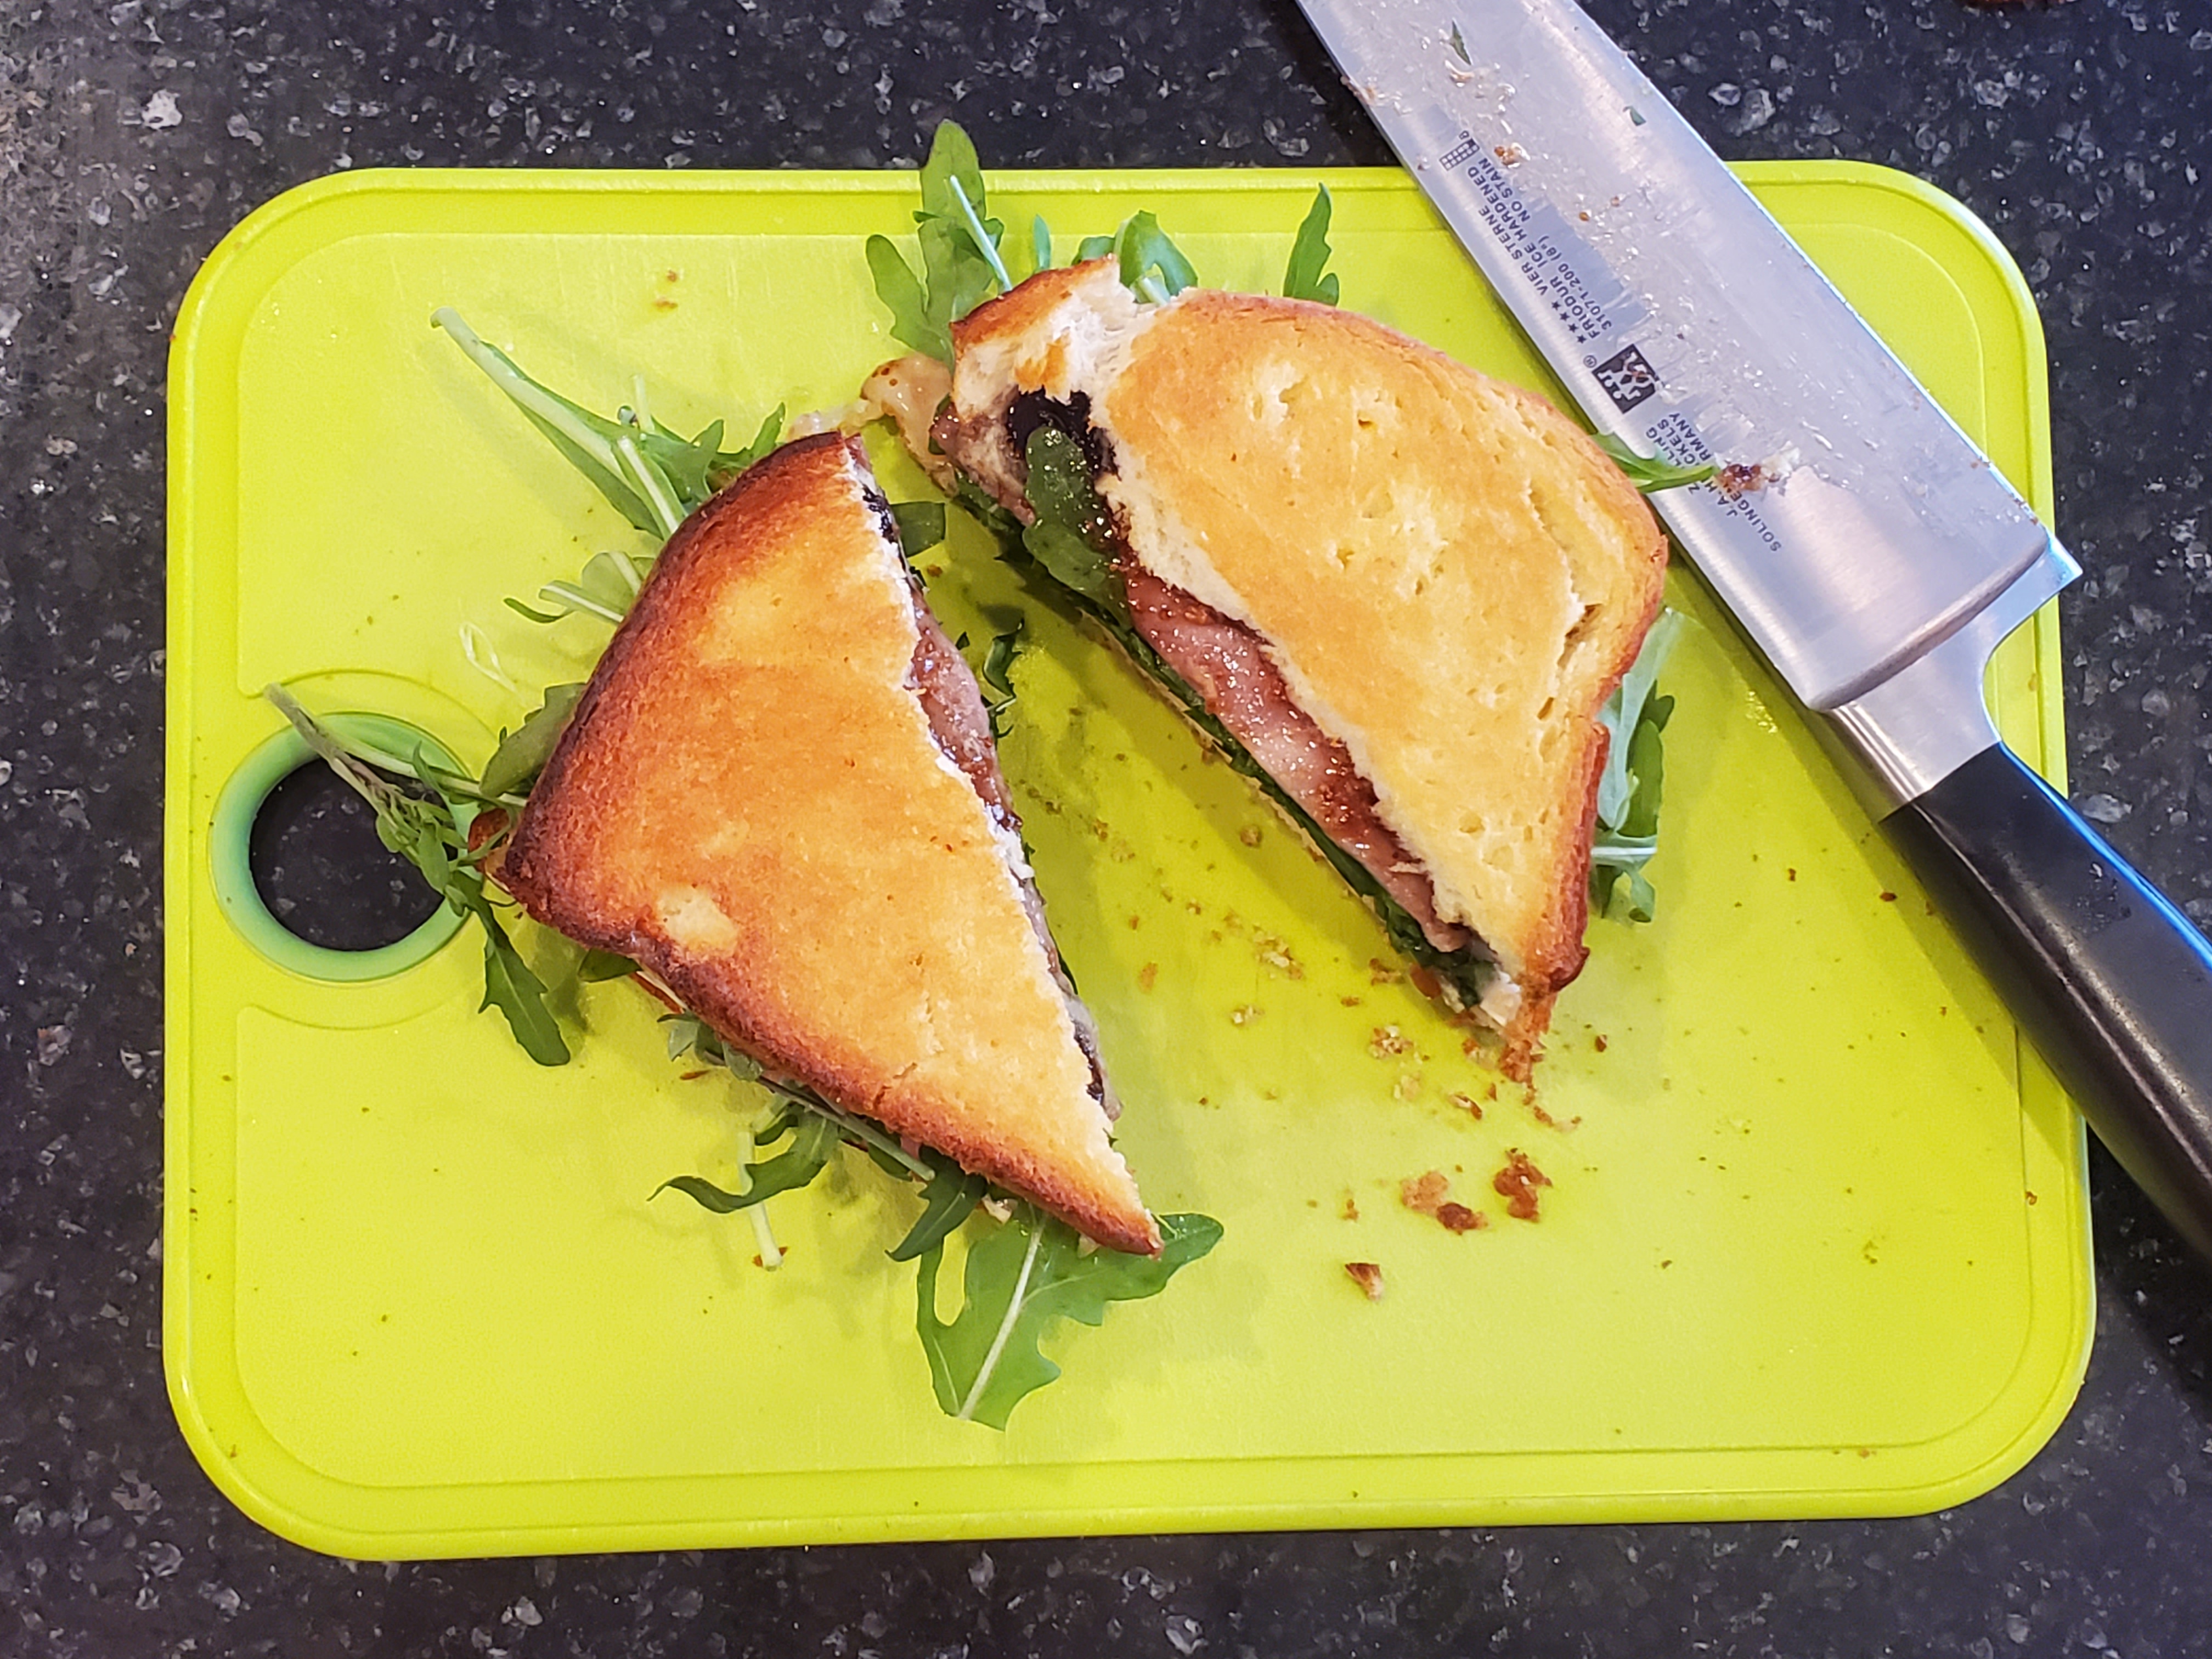 The brie/fig/arugula grilled cheese sits a top the bright lime green cutting board, cut diagonally in half. A sharp knife sits at the right.